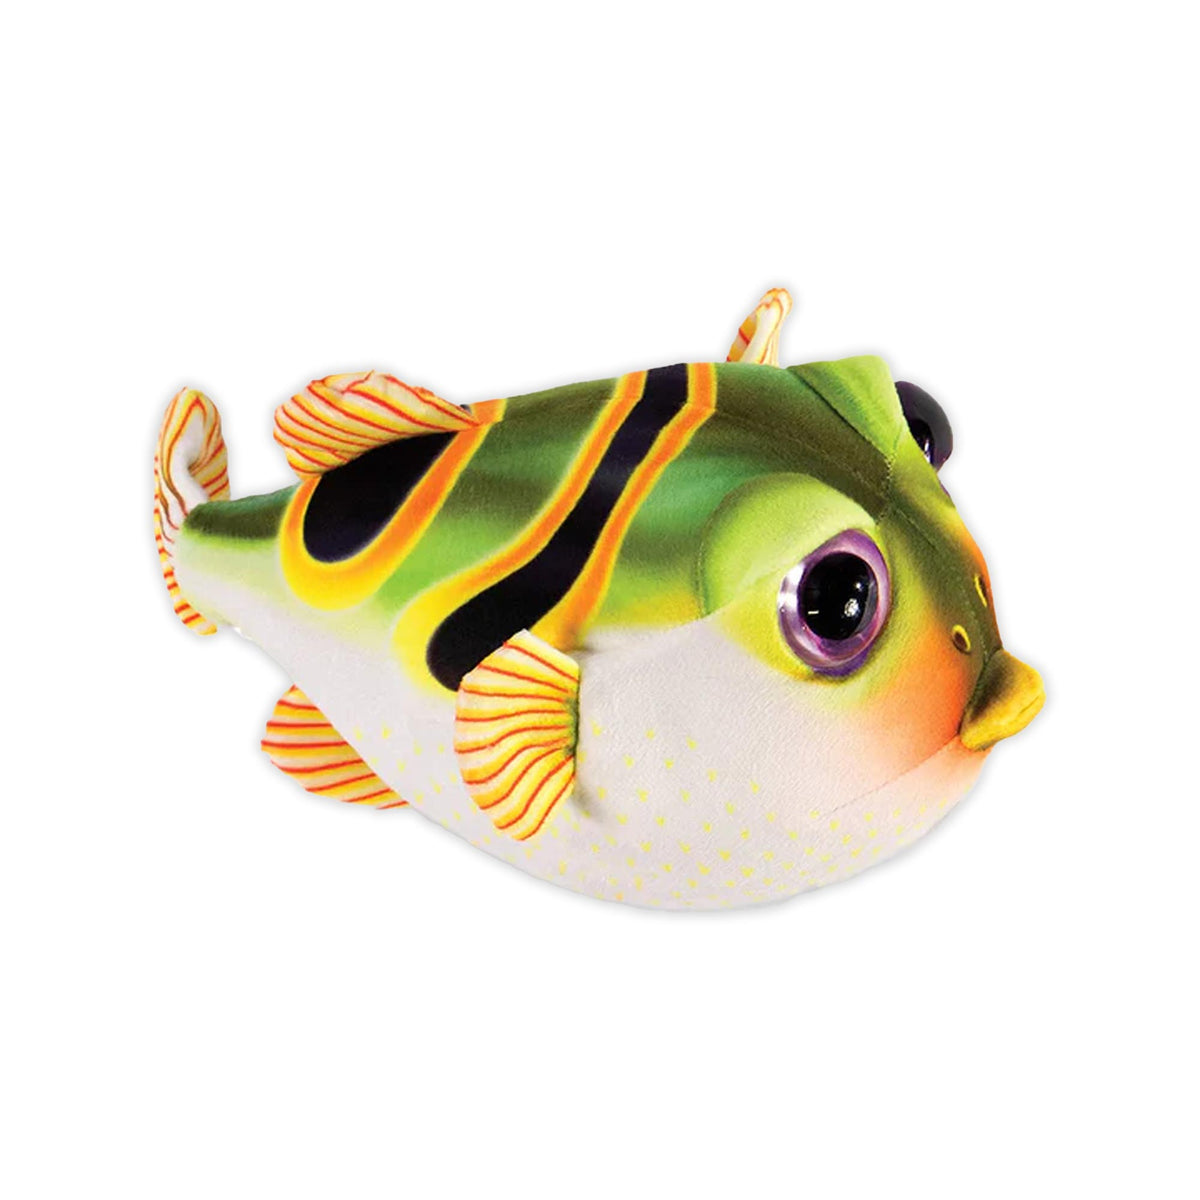 Real Planet Butterfly Fish Rocket 15 Inch Realistic Soft Plush